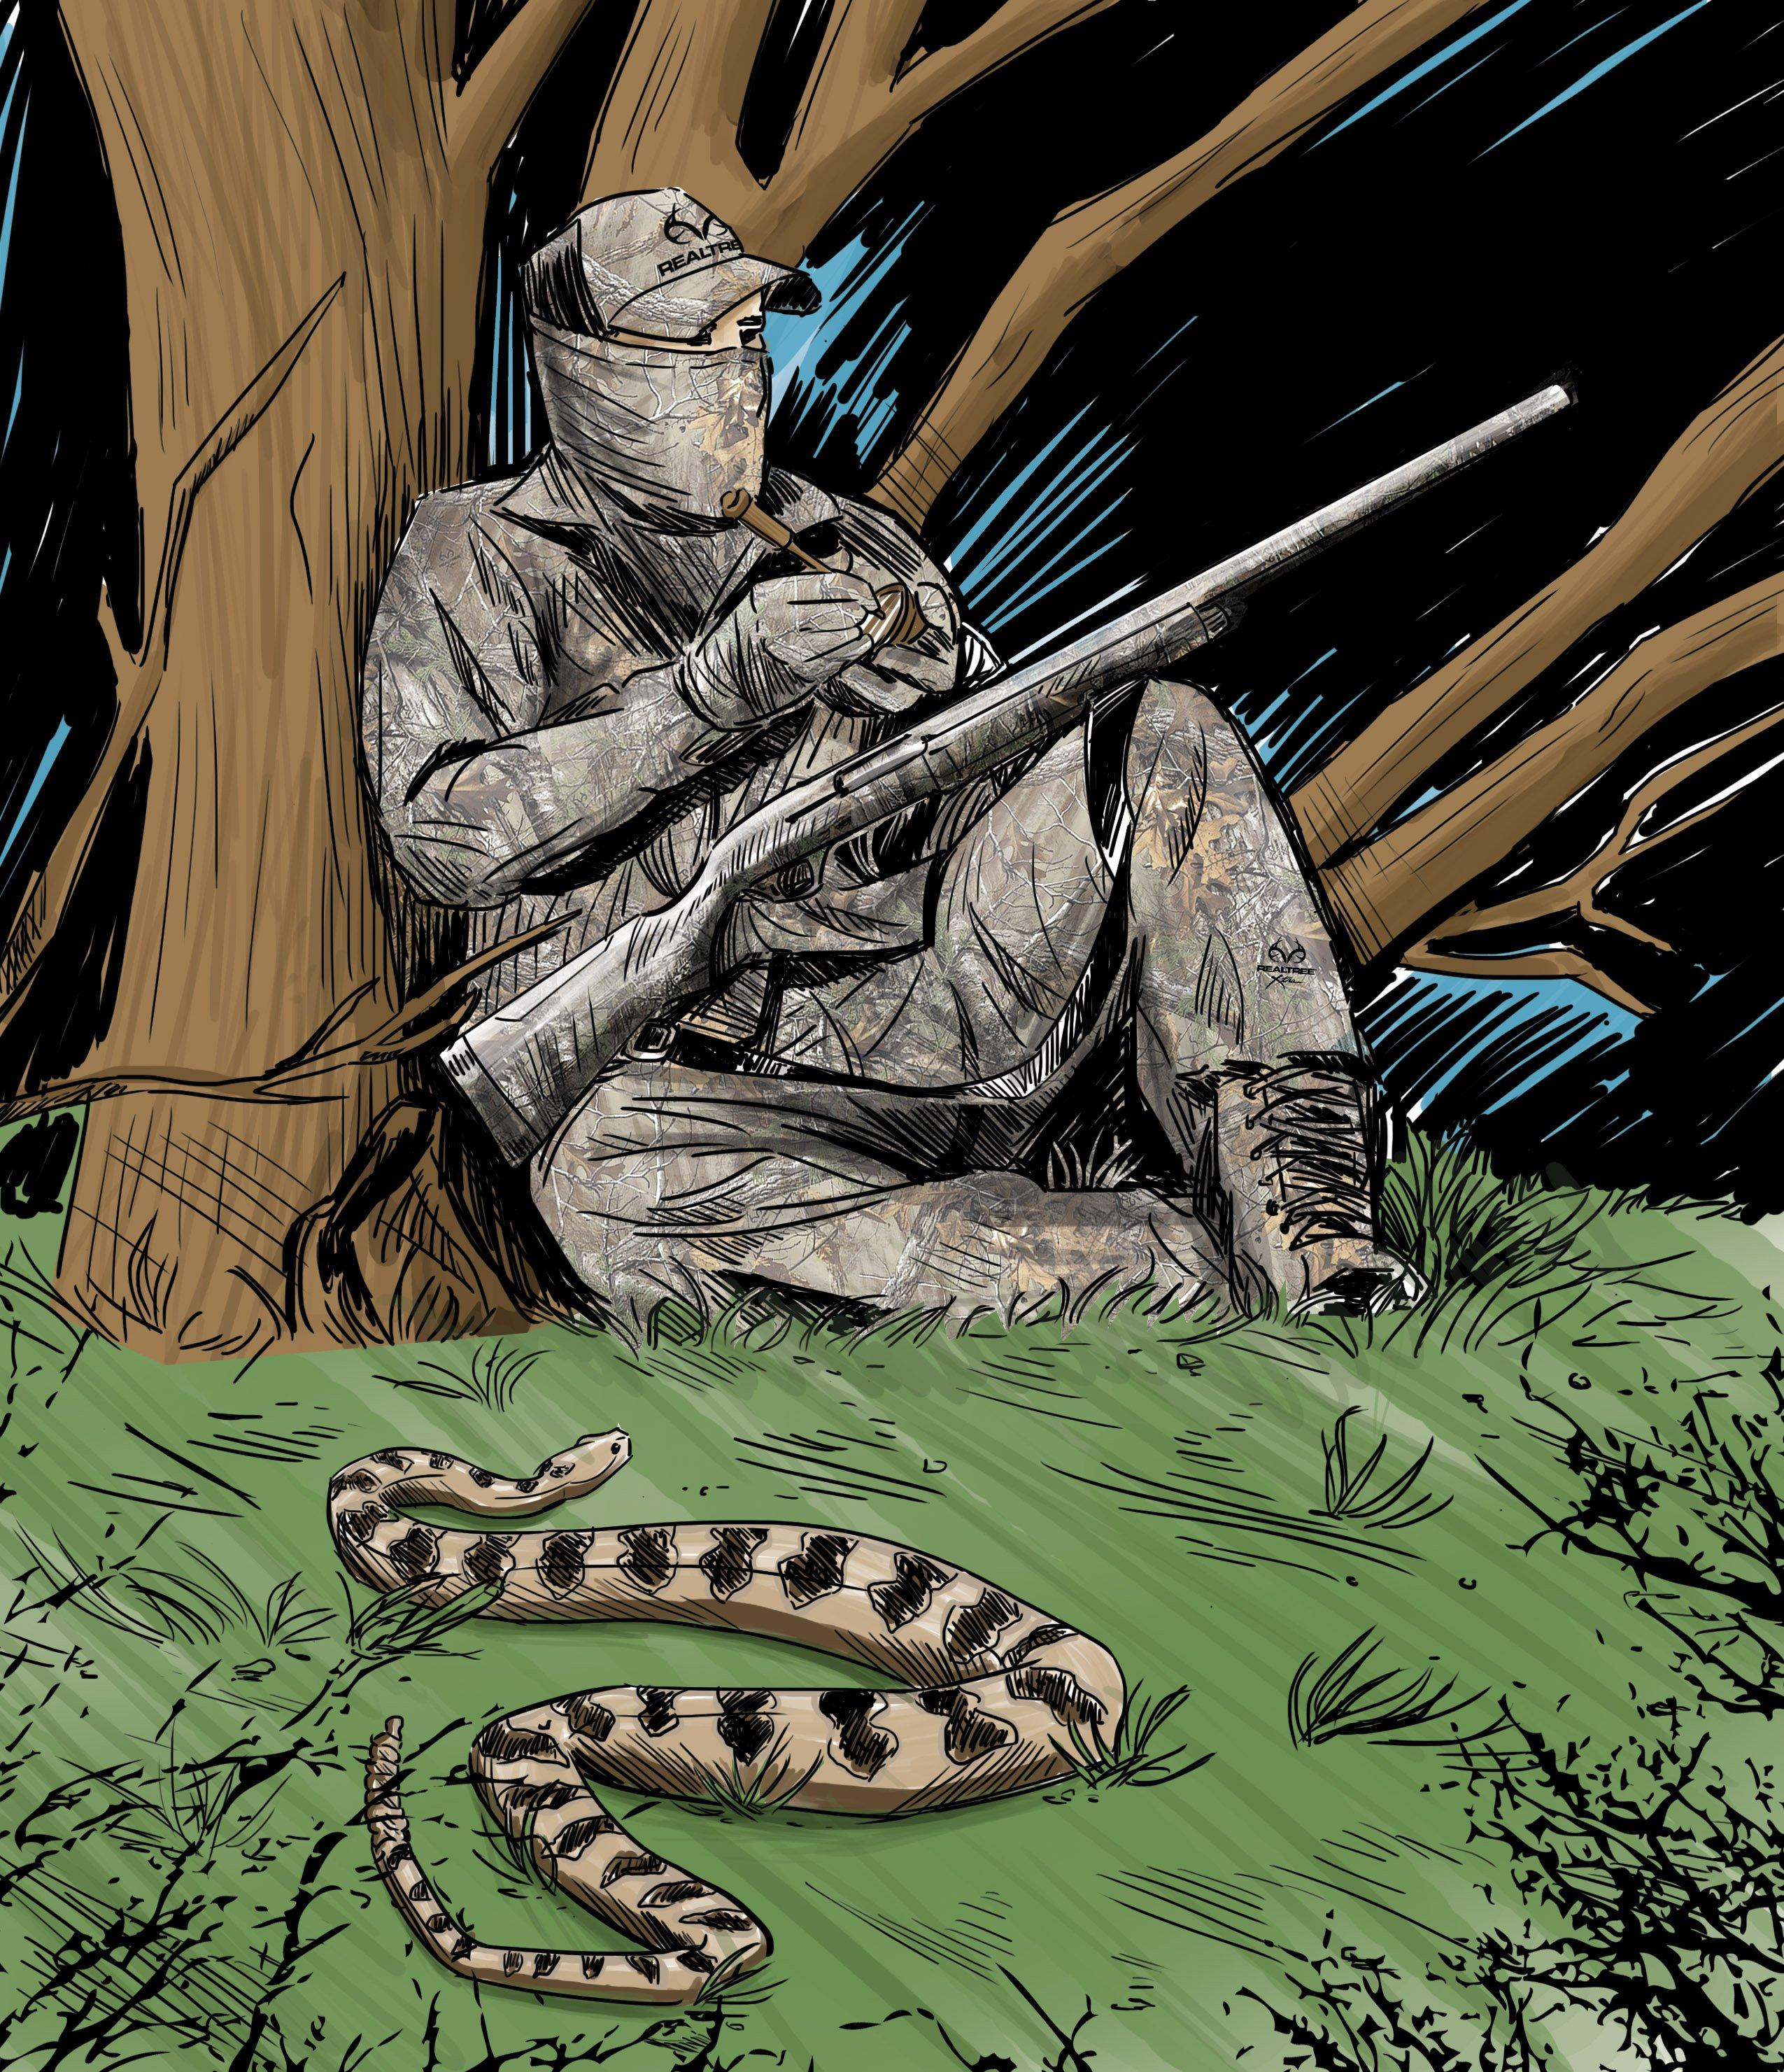 Ever call in a rattlesnake while turkey hunting? (Ryan Orndorff illustration)